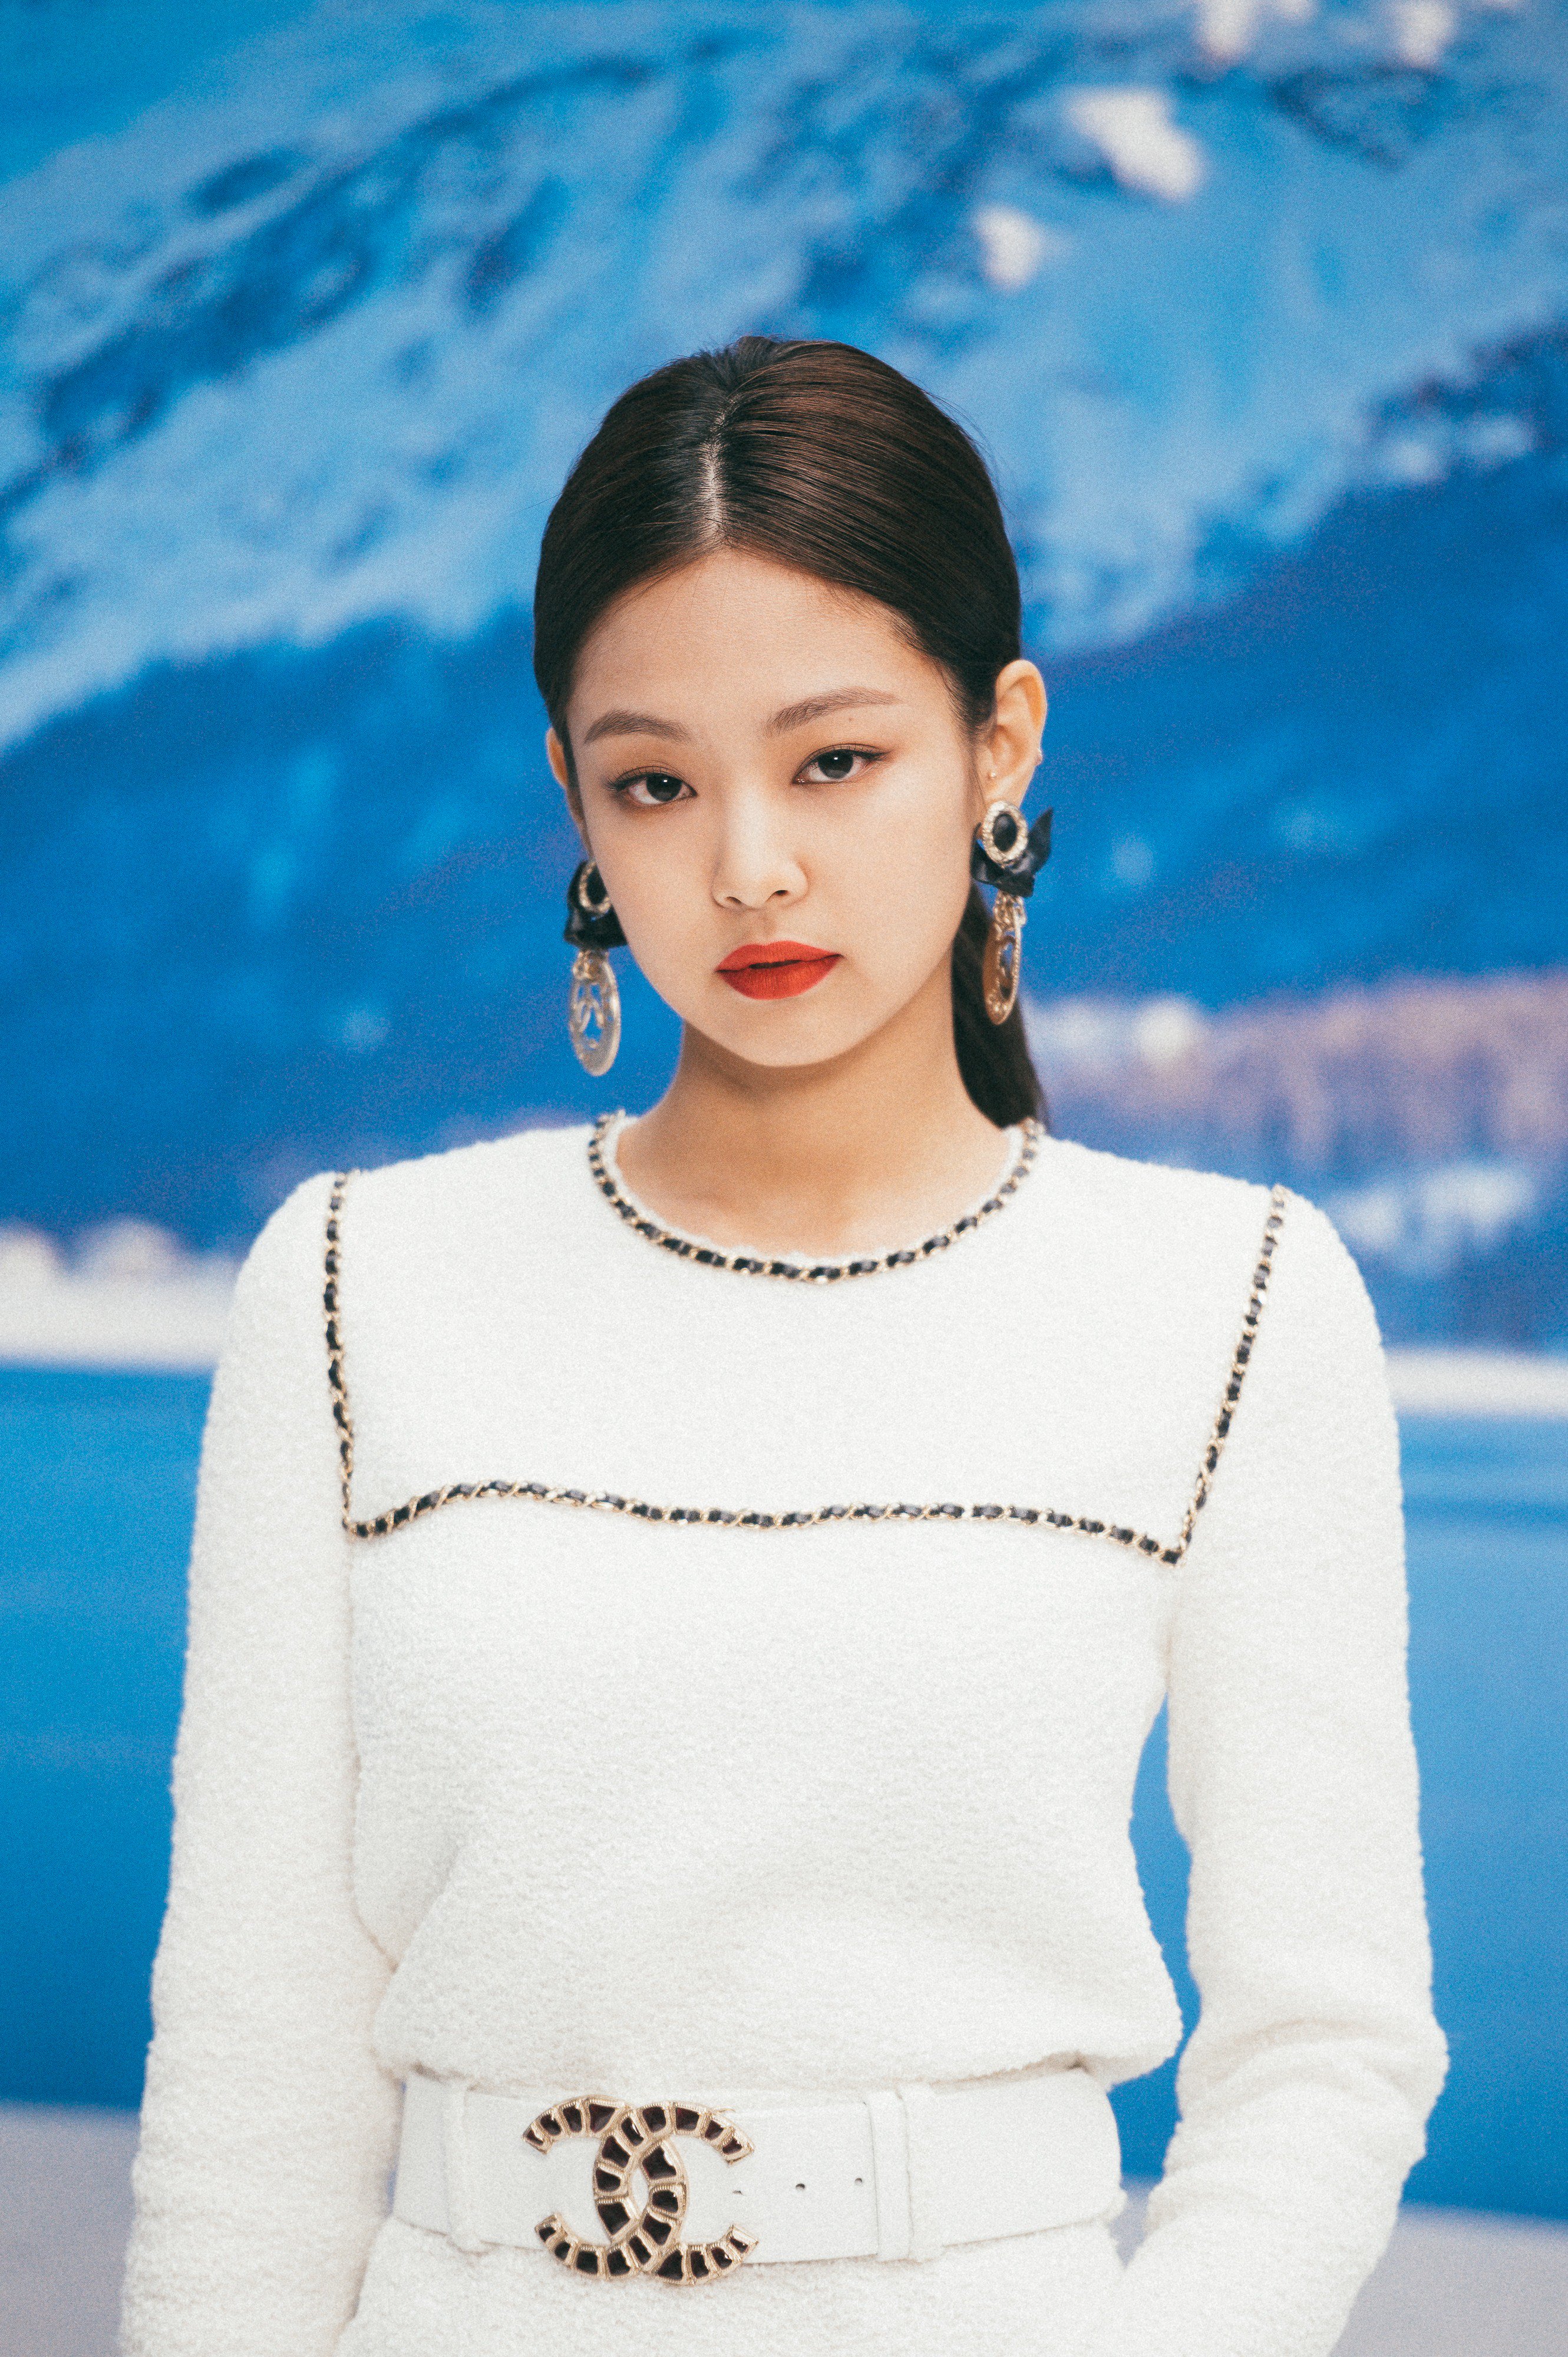 CHANEL Global Ambassador JENNIE ranked at #1 in top 5 most popular